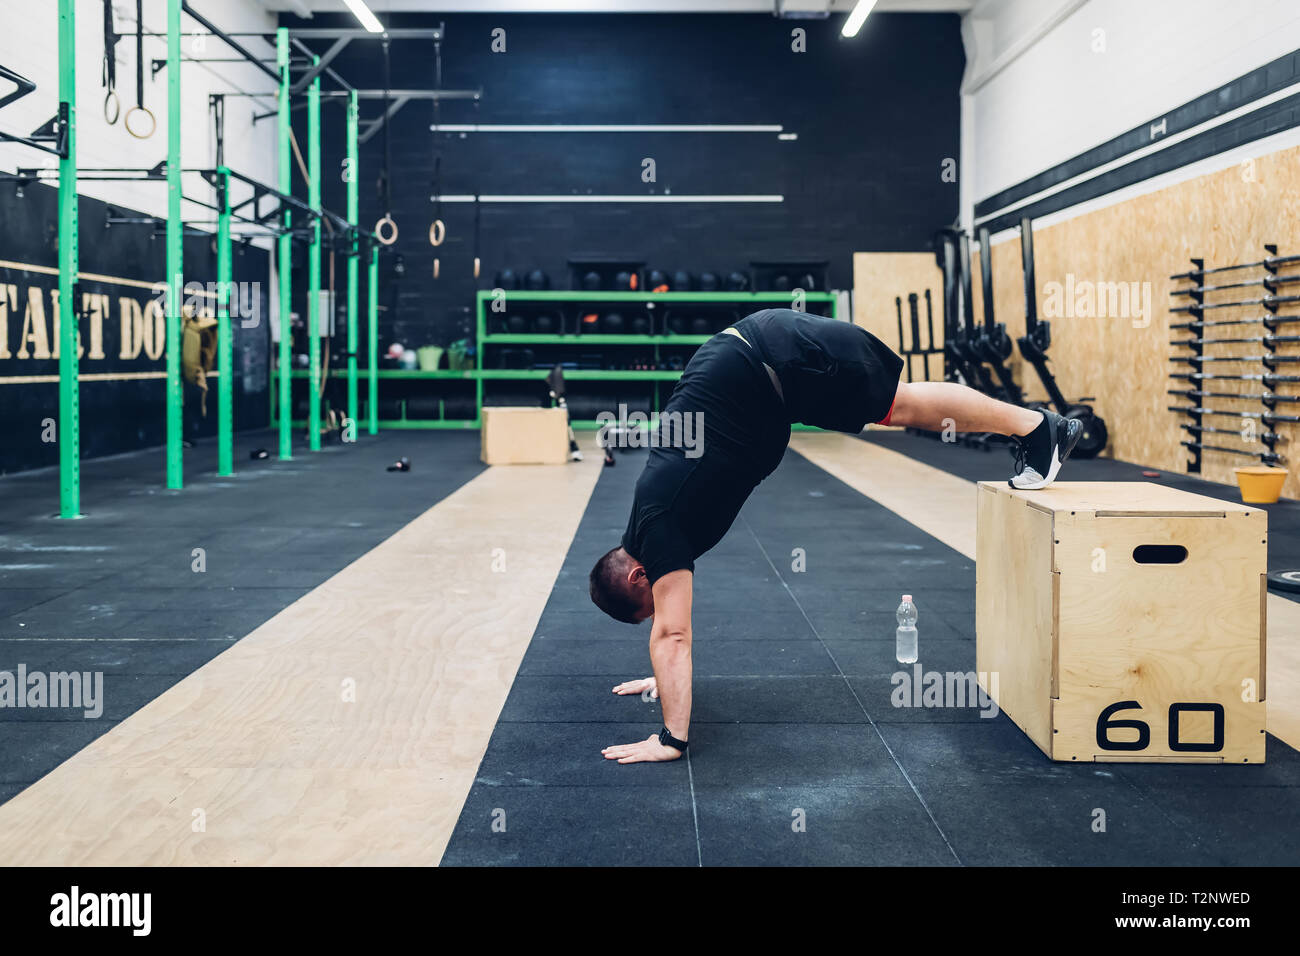 Man with disability training in gym Stock Photo